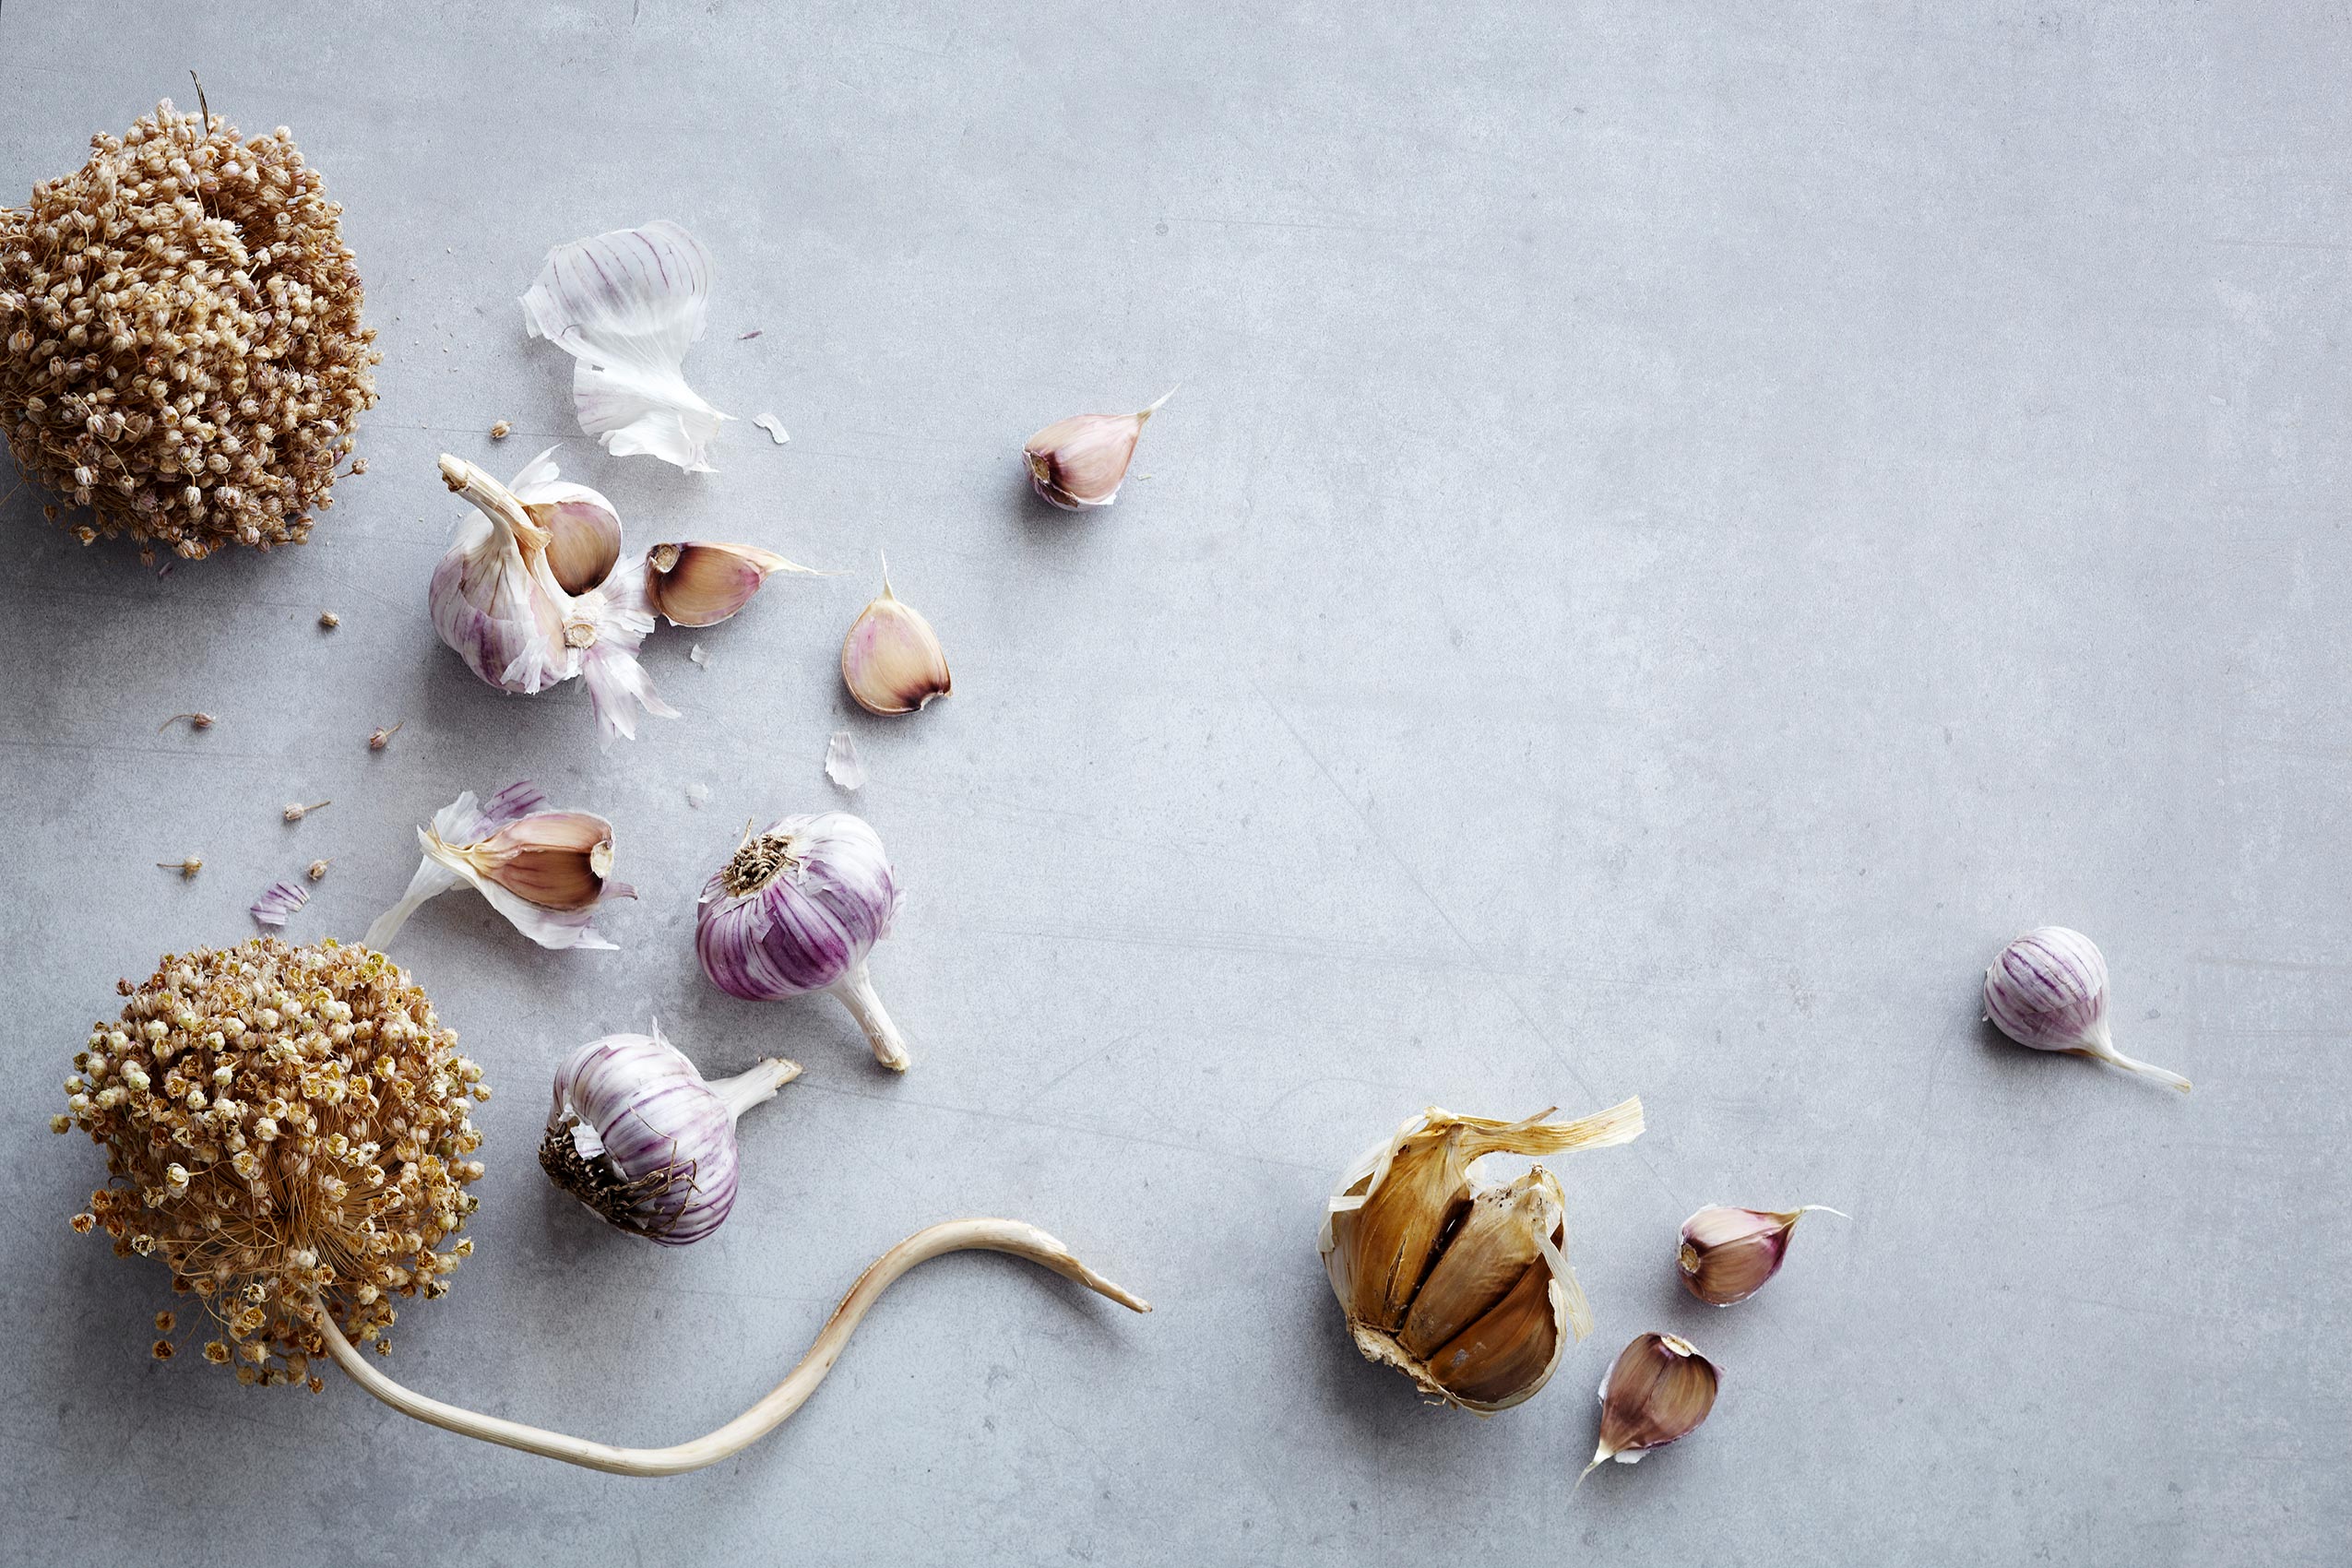 Spice Heroes • Garlic Cloves on Concrete Bench • Advertising & Editorial Food Photography